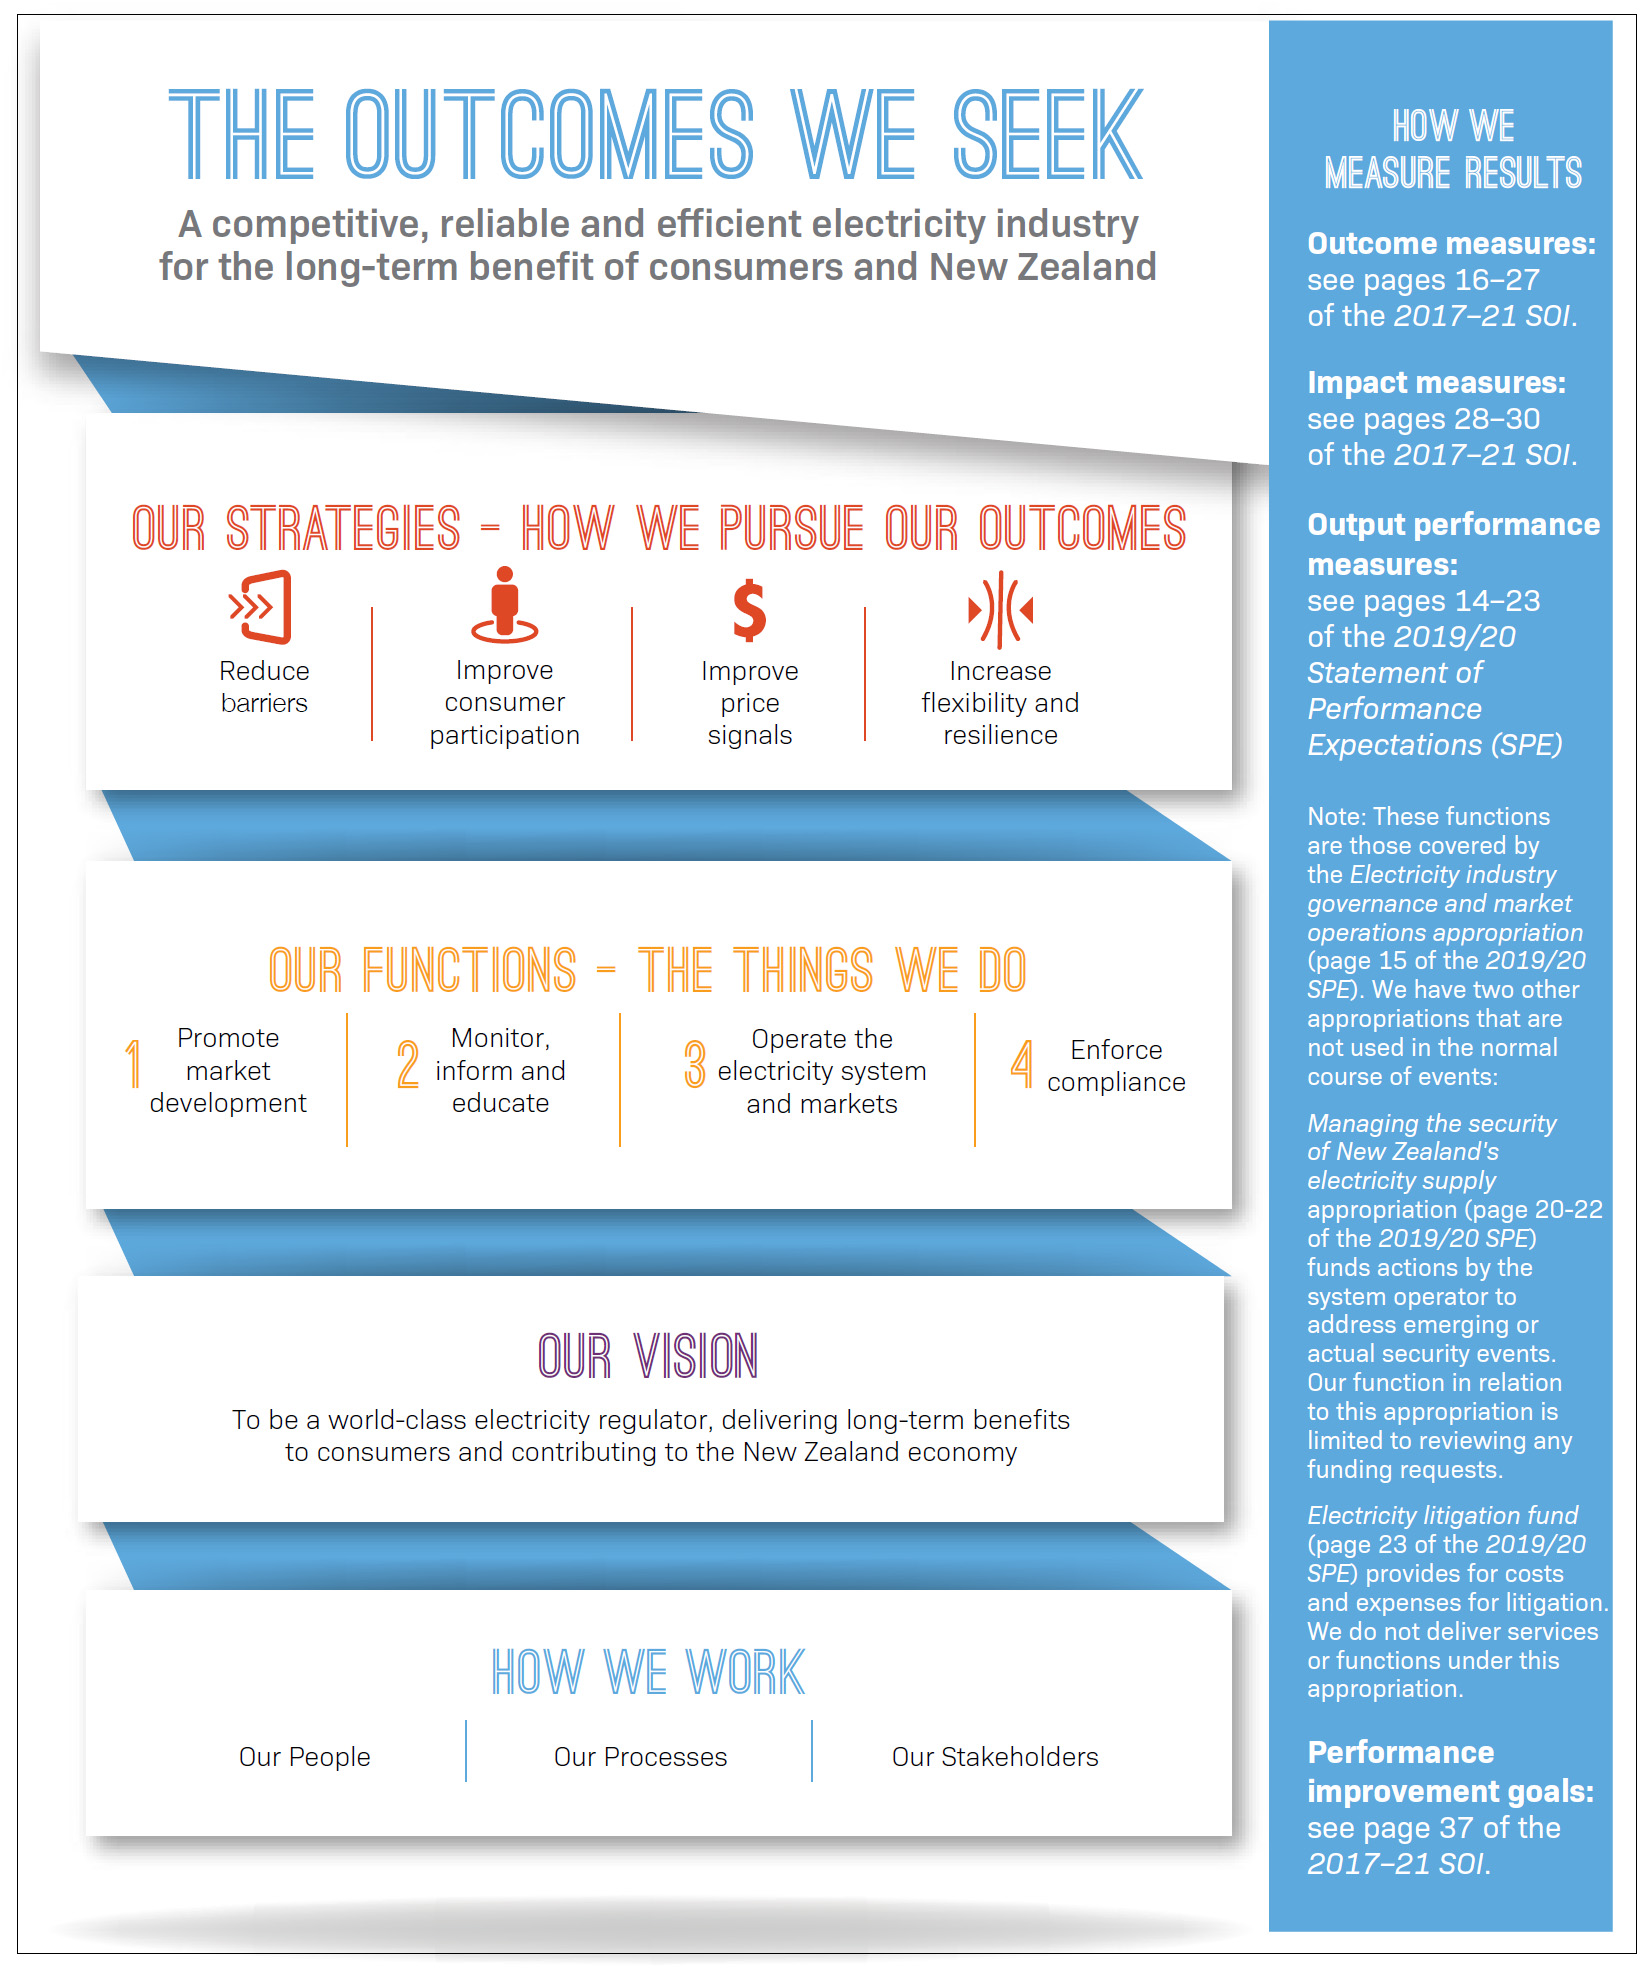 Infographic from the Electricity Authority’s 2020/21 Annual Report that shows the outcomes it seeks, its strategies, its functions, its vision, and how it works.